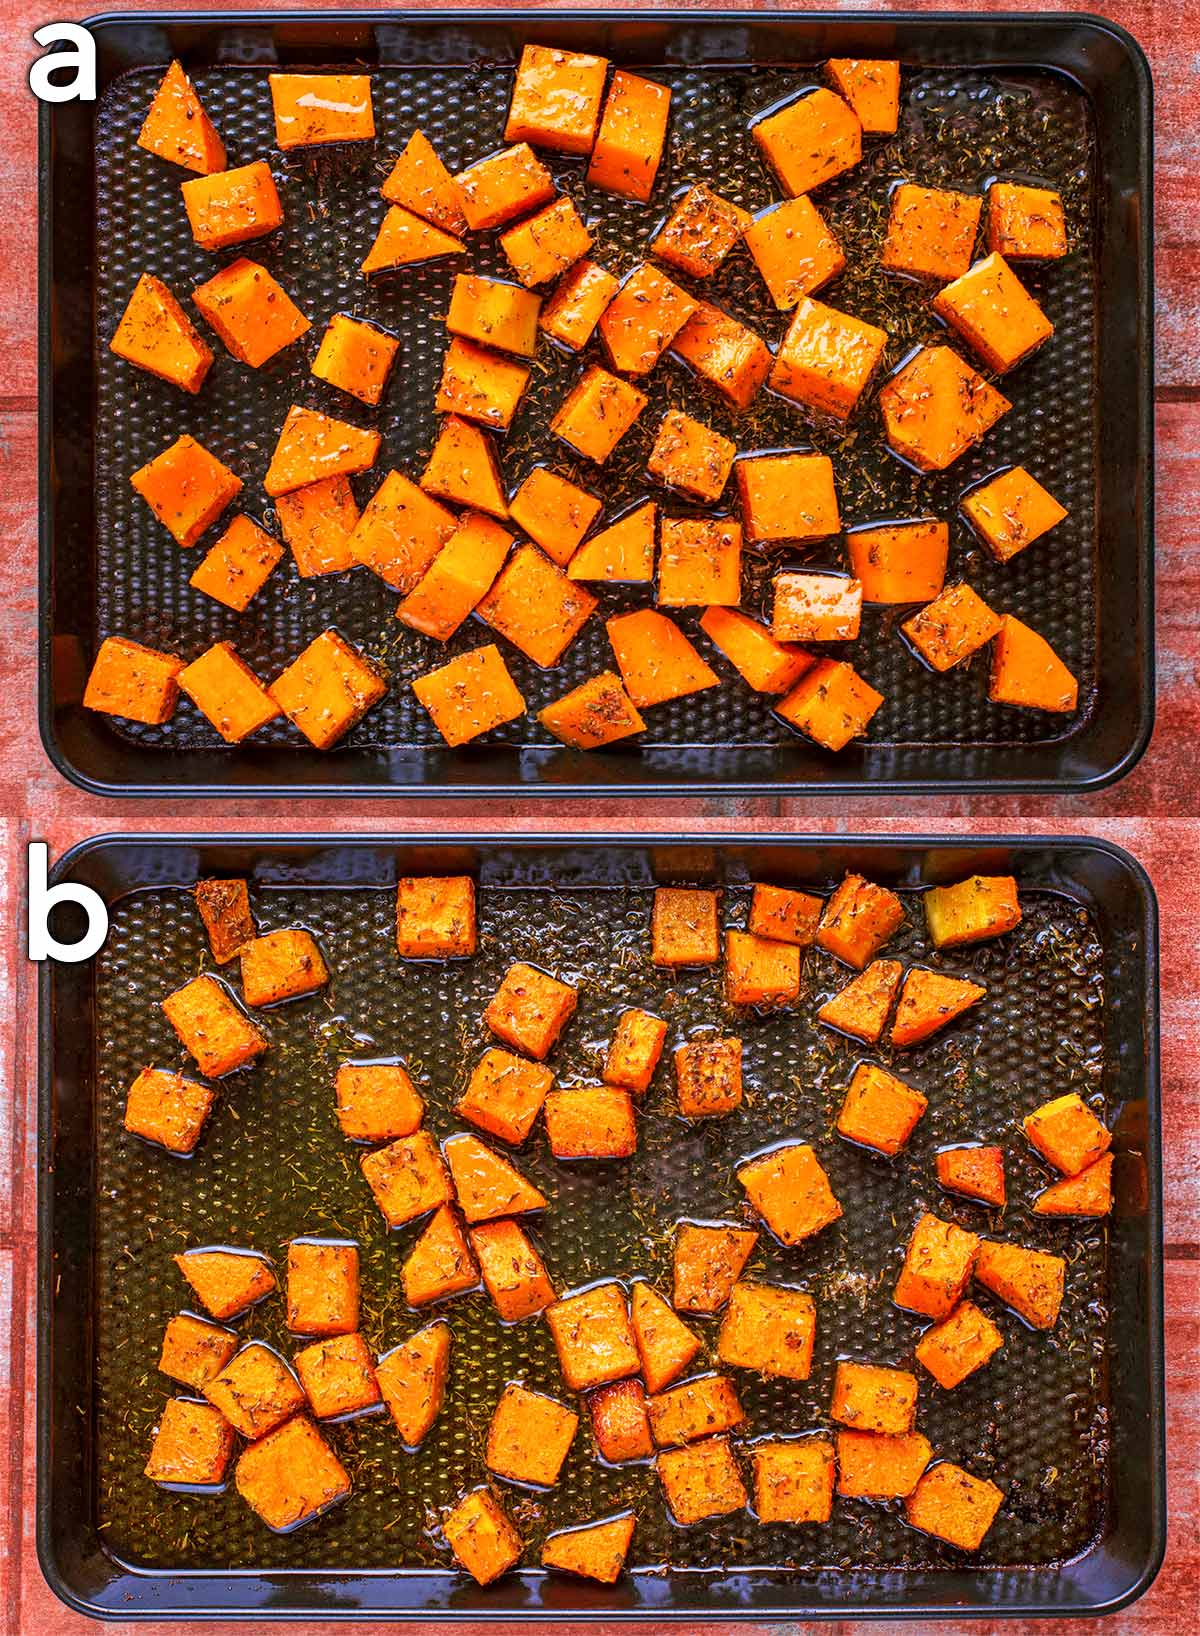 Two shot collage of squash cubes on a baking tray, before and after roasting.